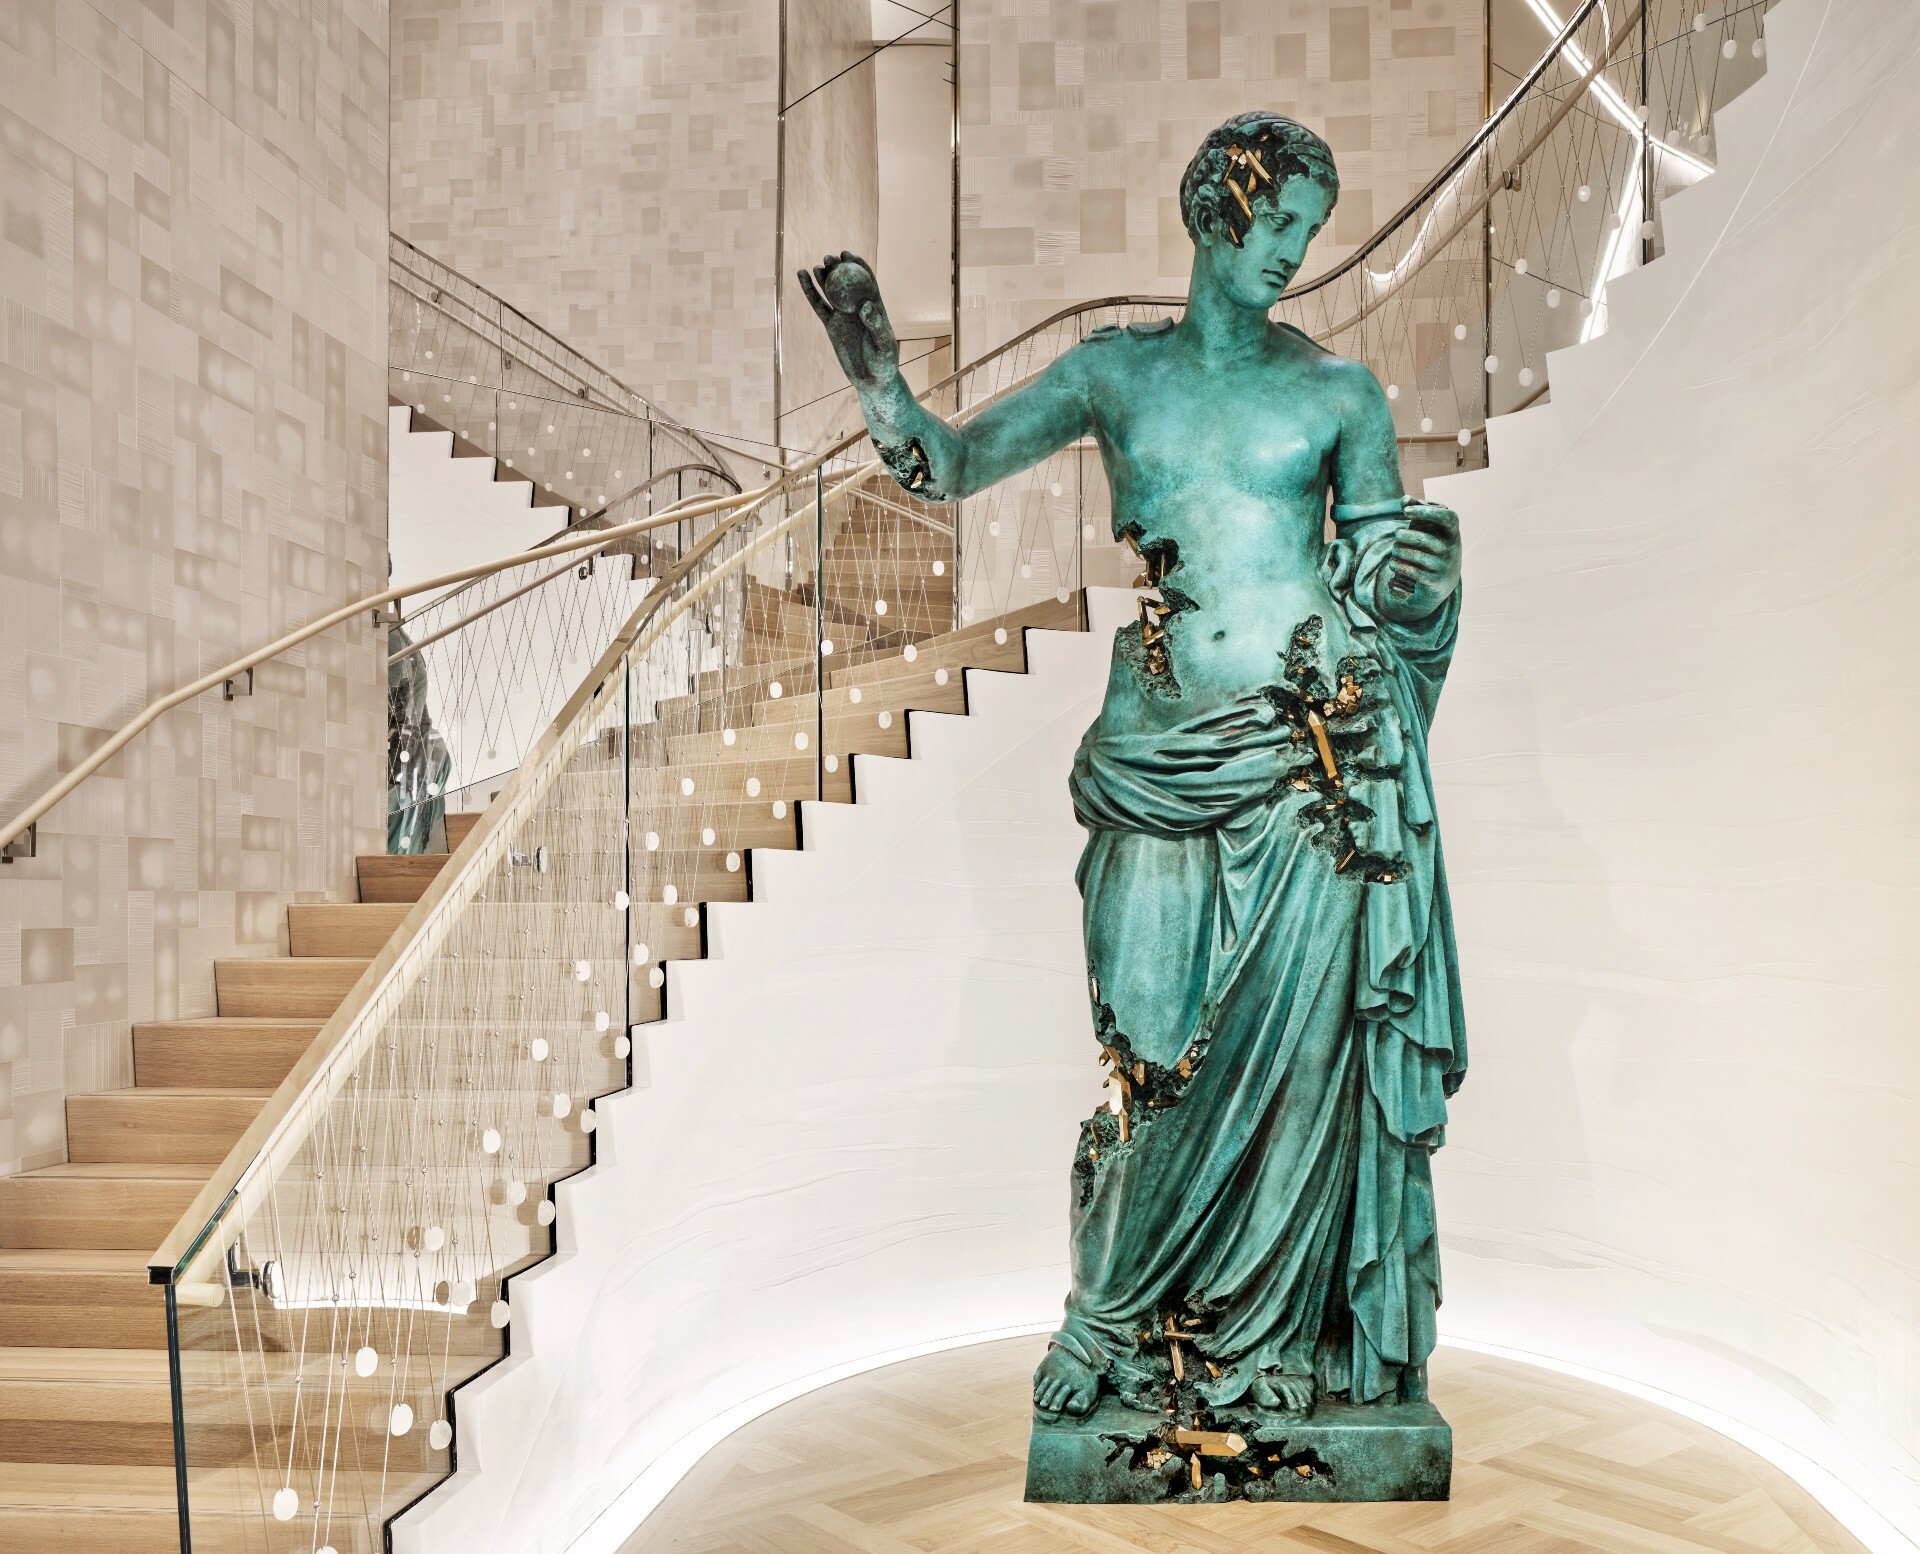 Tiffany's revamped NYC flagship is a stunner